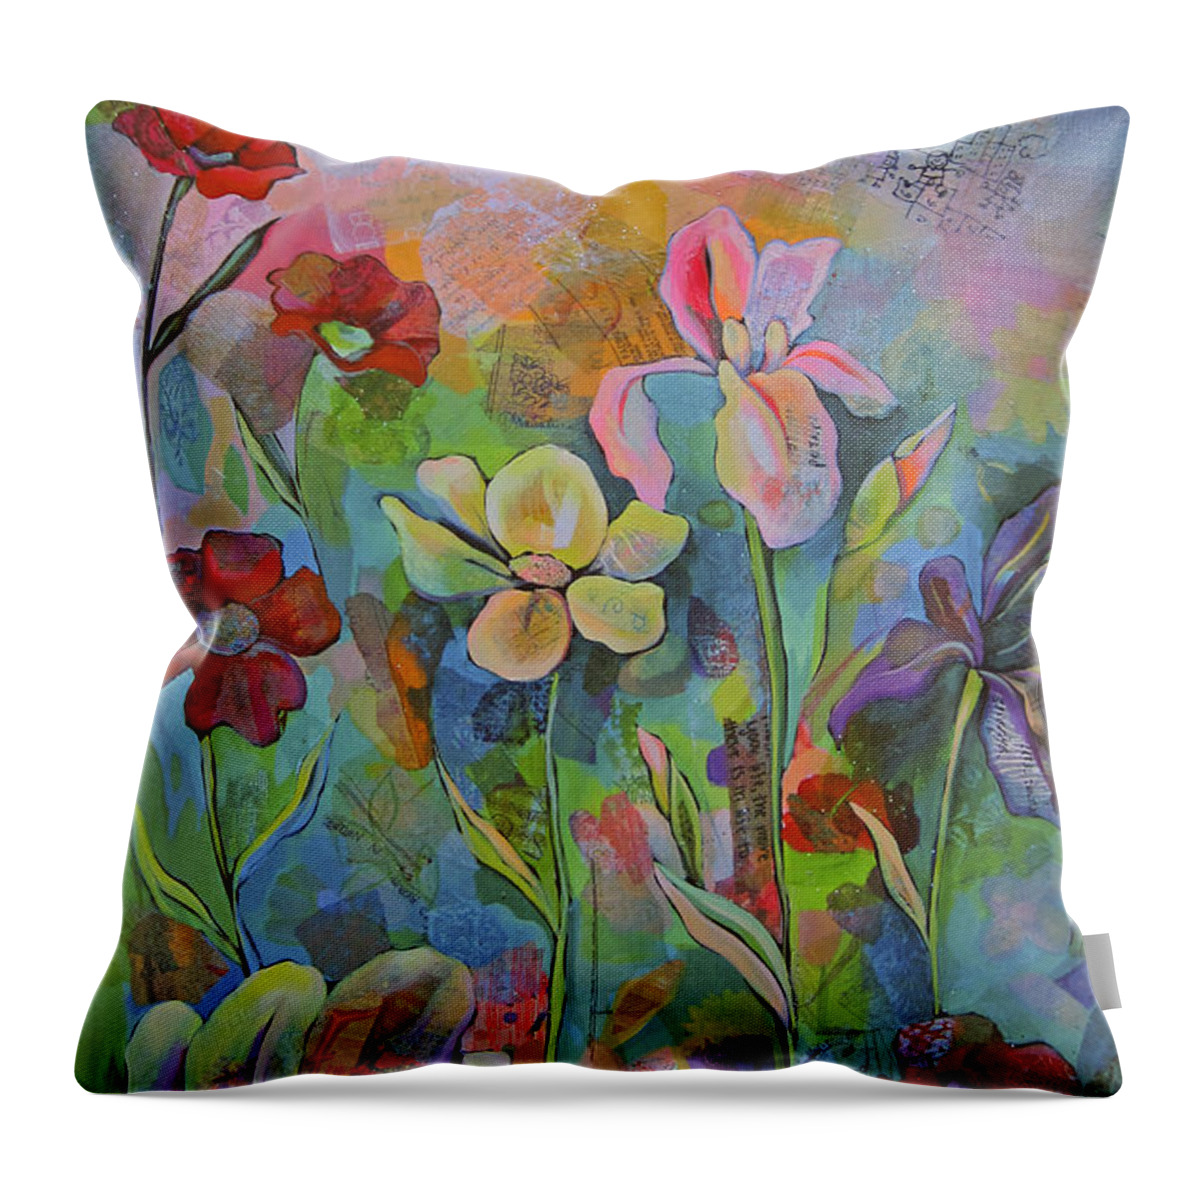 Garden Throw Pillow featuring the painting Garden of Intention - Triptych Center Panel by Shadia Derbyshire